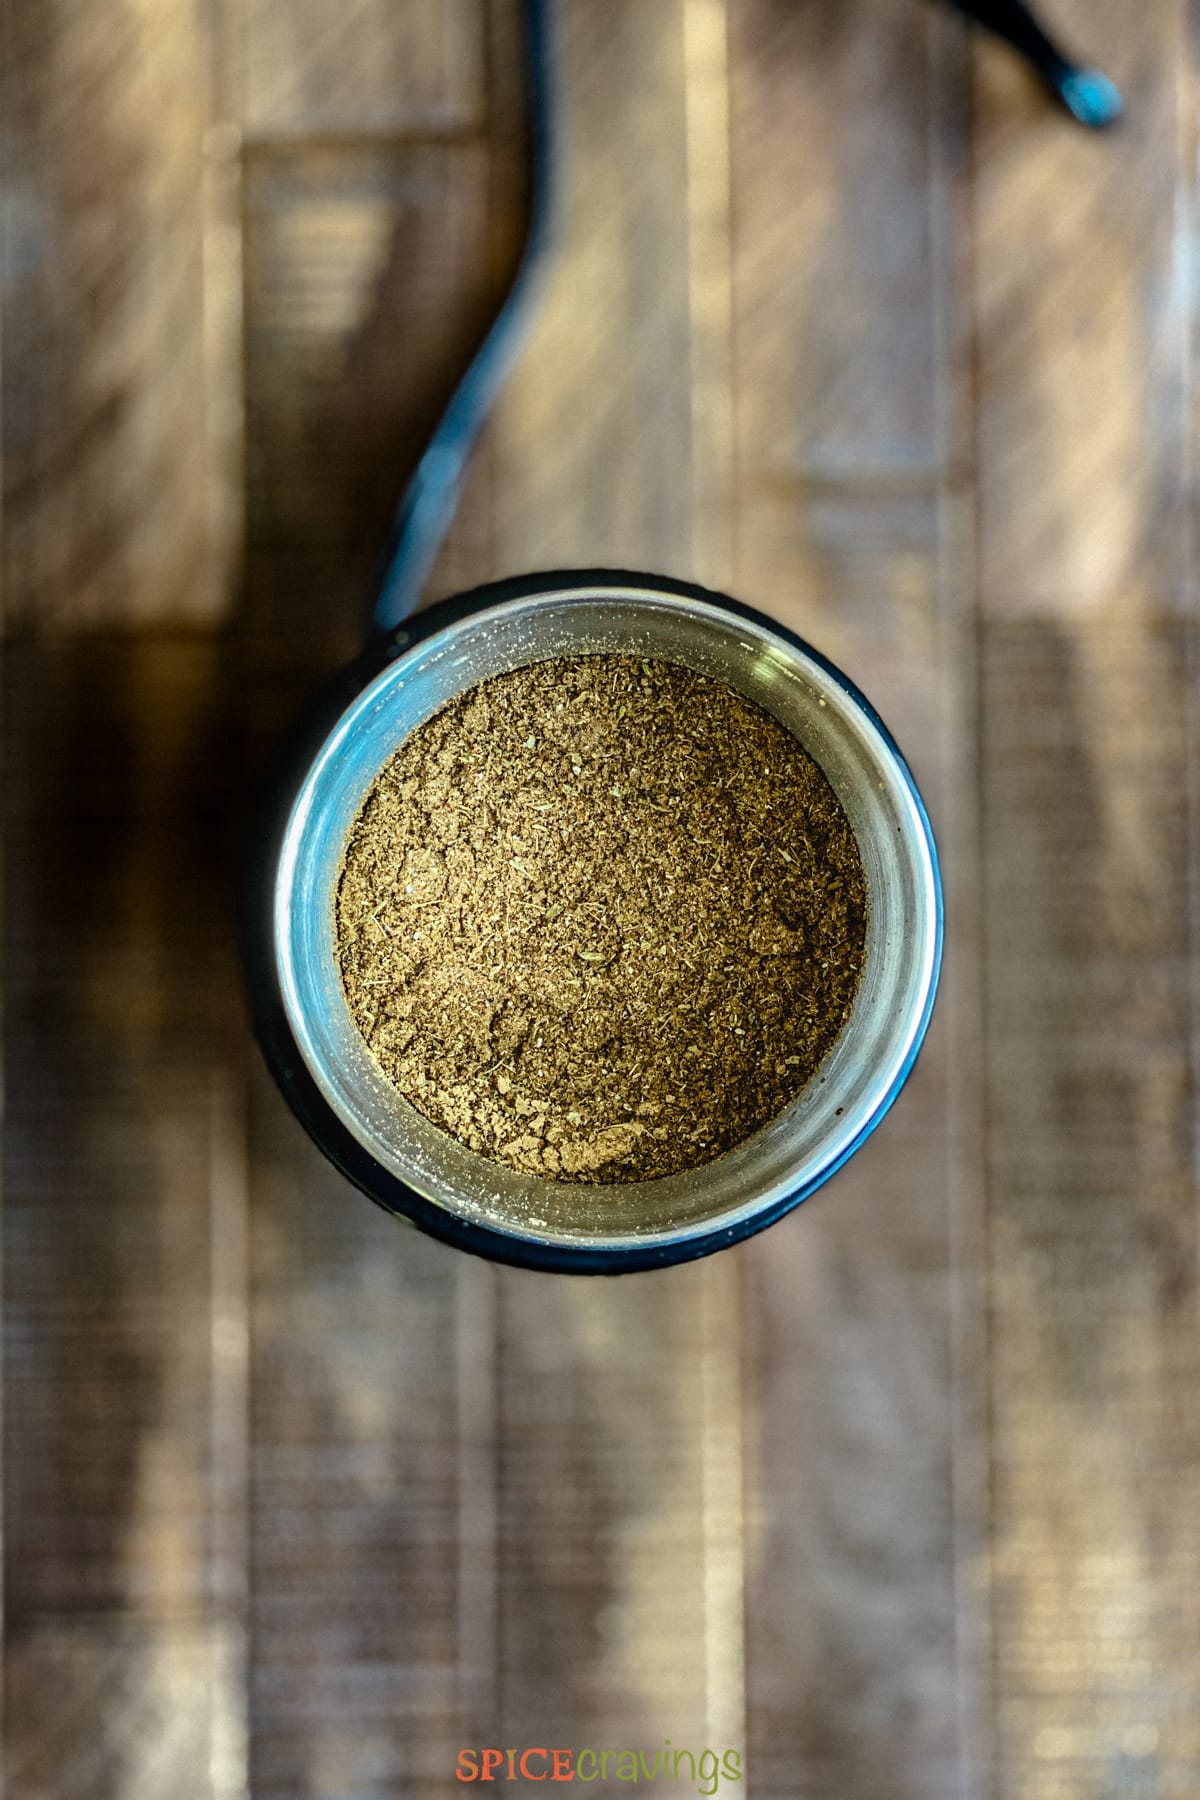 ground up chai masala powder from above